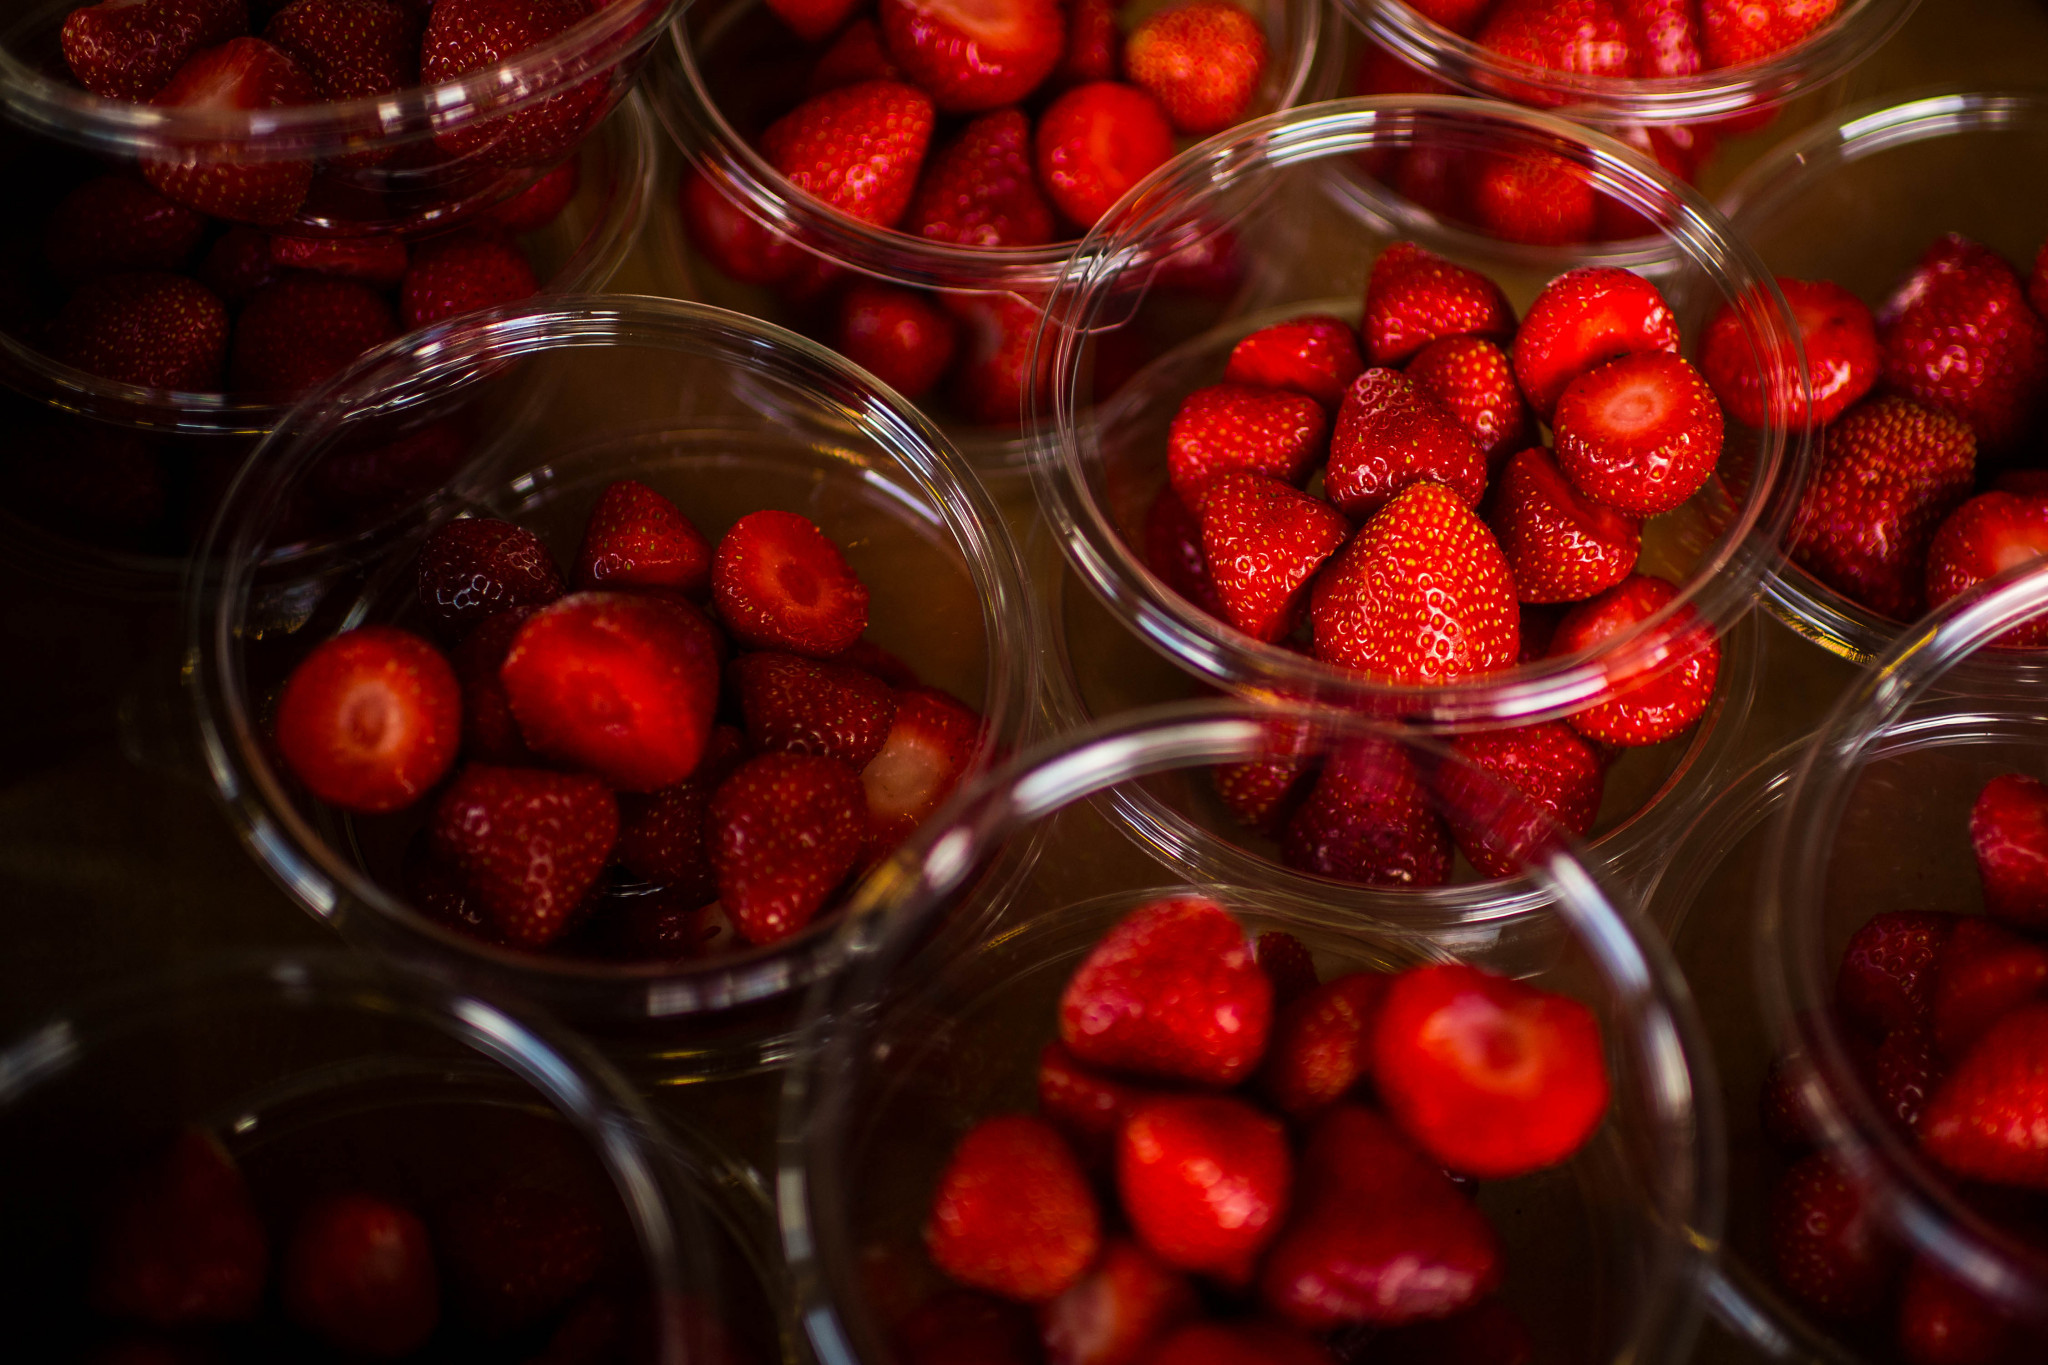 Strawberries, a Wimbledon staple, are seen here in single-use plastic containers - something organisers have pledged to move away from ©Getty Images 